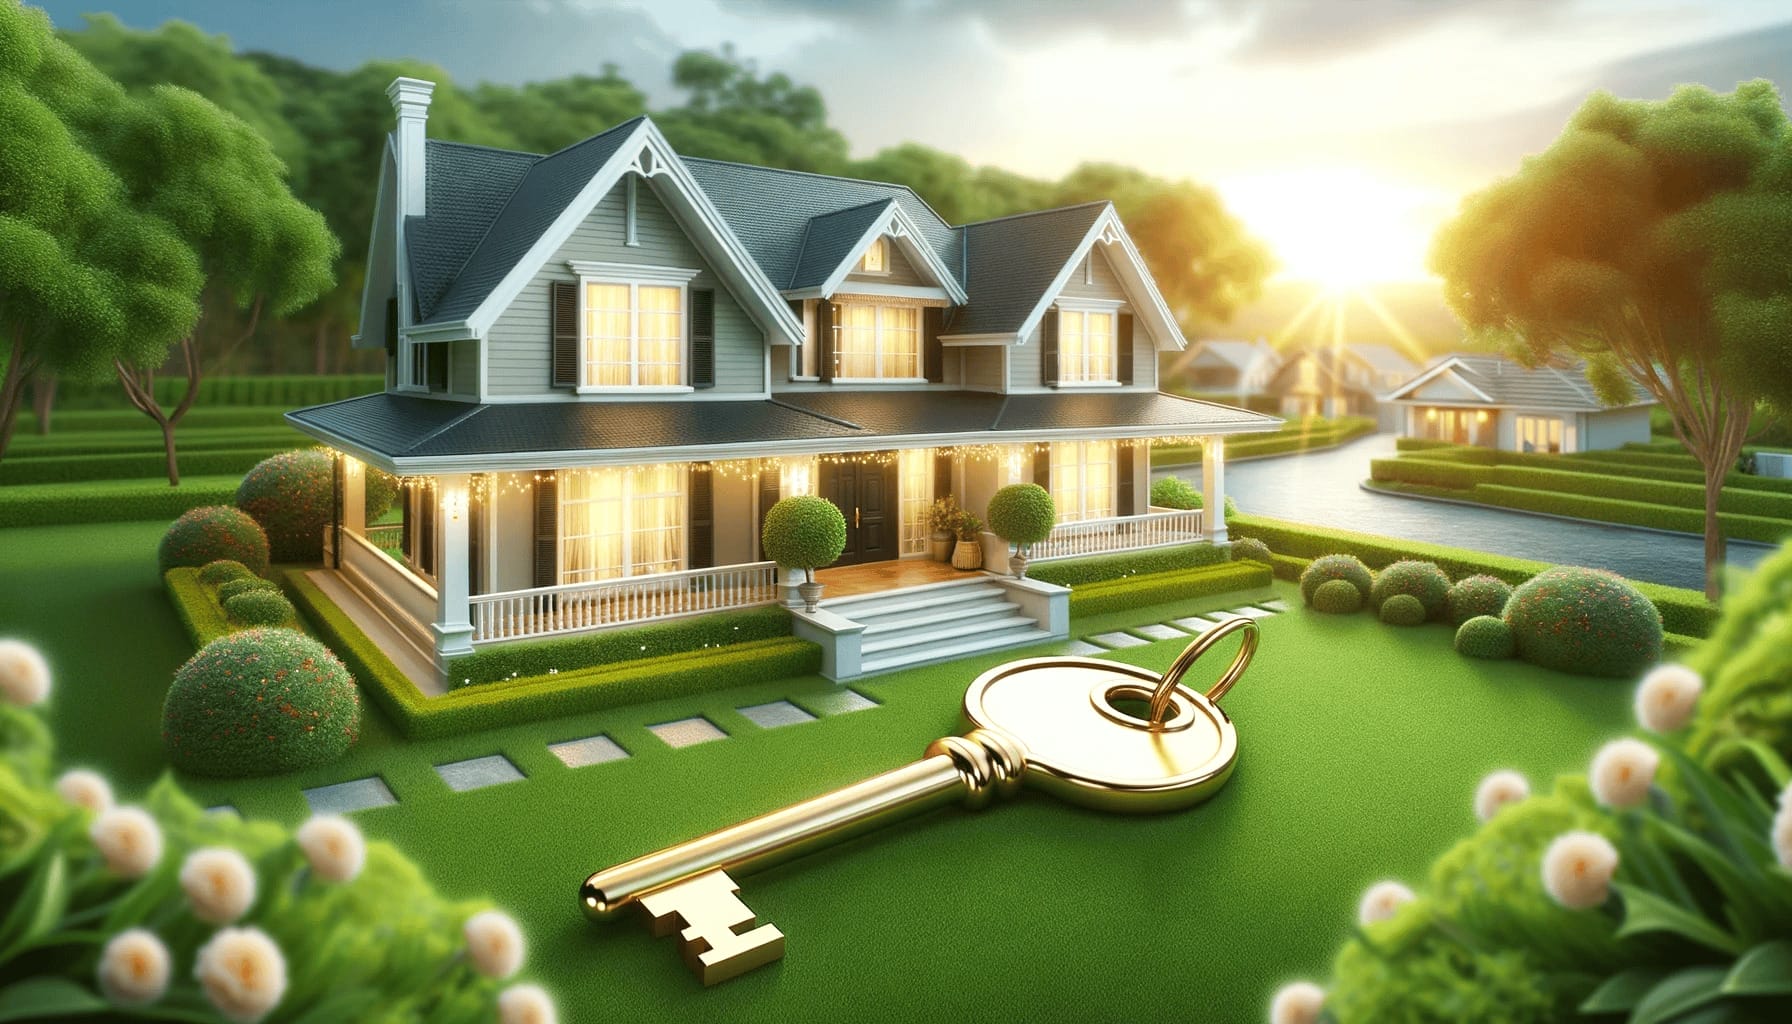 DALL·E 2023 10 17 18.31.22 Photo of a beautiful home with a green lawn and a golden key floating above it symbolizing approved home financing